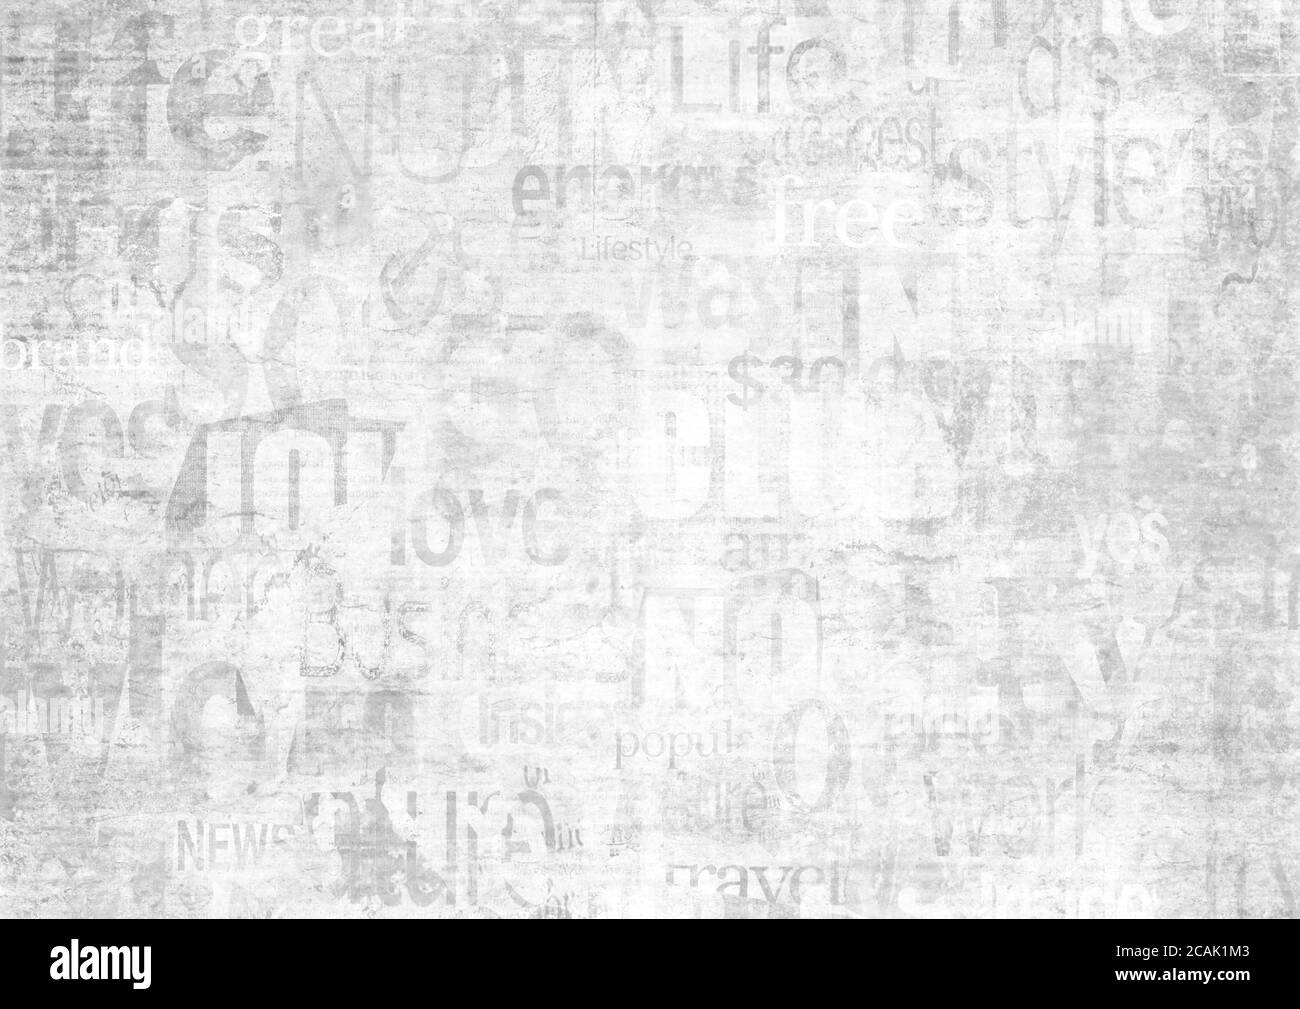 Old newspaper paper grunge with letters, words texture background. Blurred vintage newspapers textured backdrop. Blur unreadable aged news lettering h Stock Photo